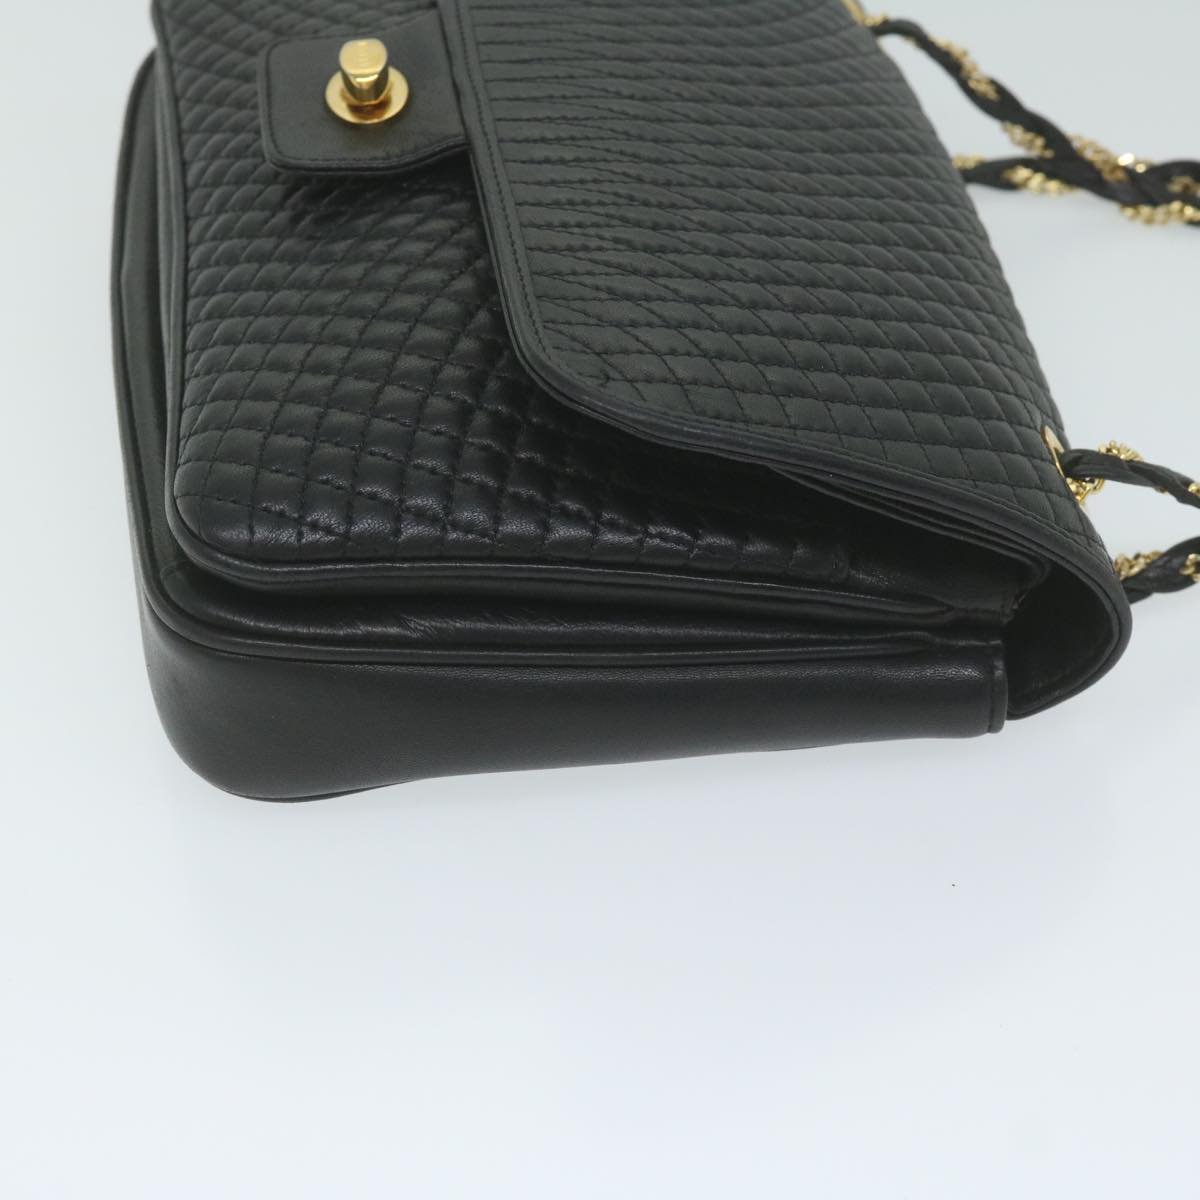 BALLY Quilted Chain Shoulder Bag Leather Black Auth am5340